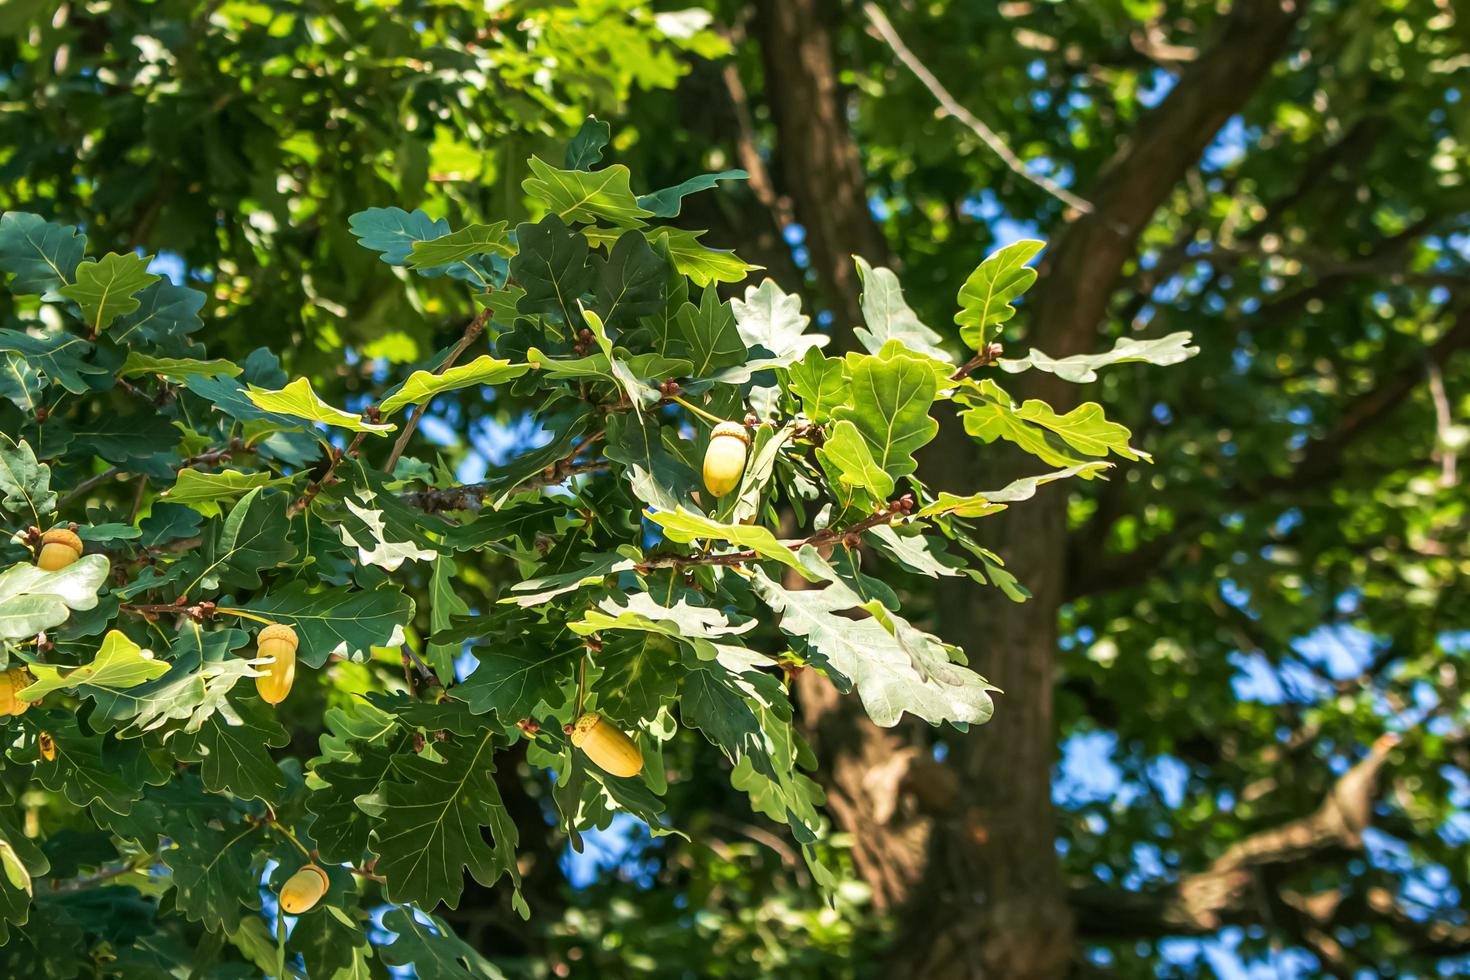 Branch of PEDUNCULATE OAK with acorns in summer. The Latin name for this tree is QUERCUS ROBUR L. photo